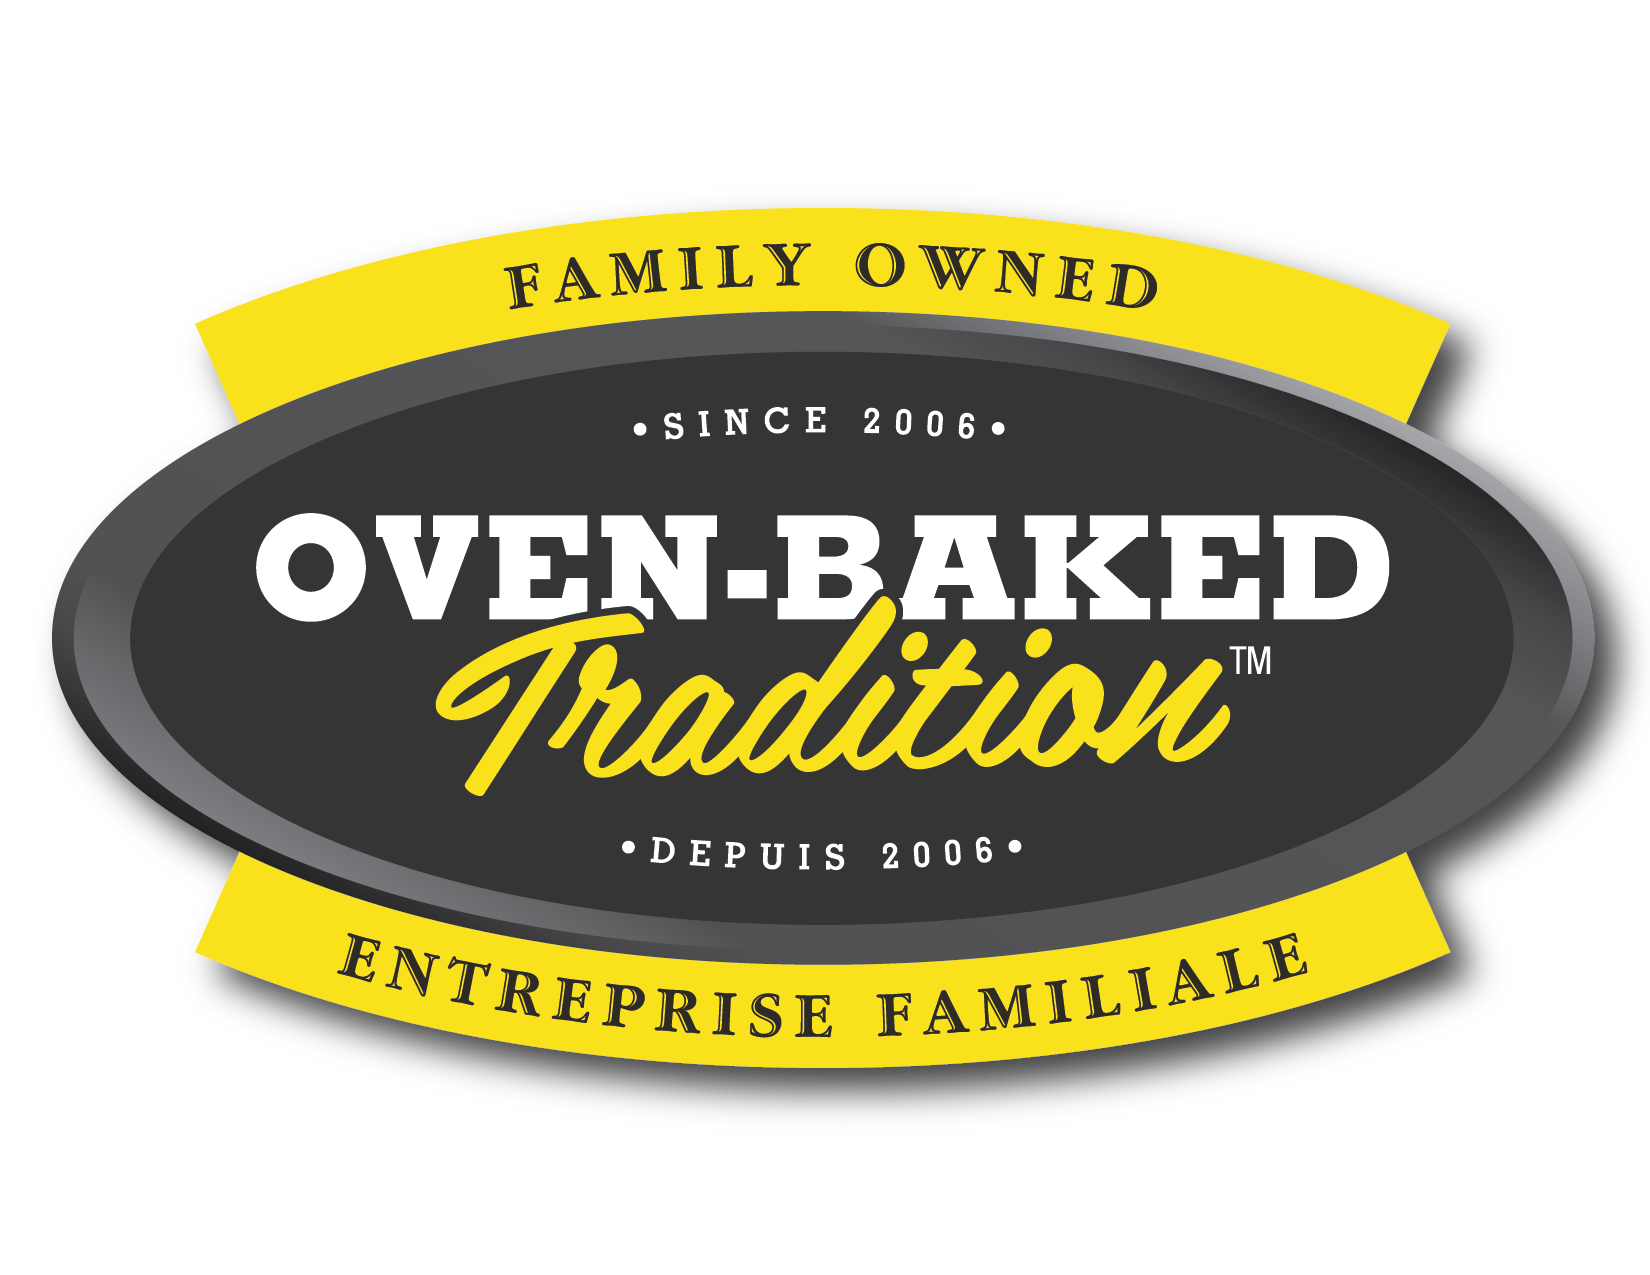 New Oven-Baked Tradition logo